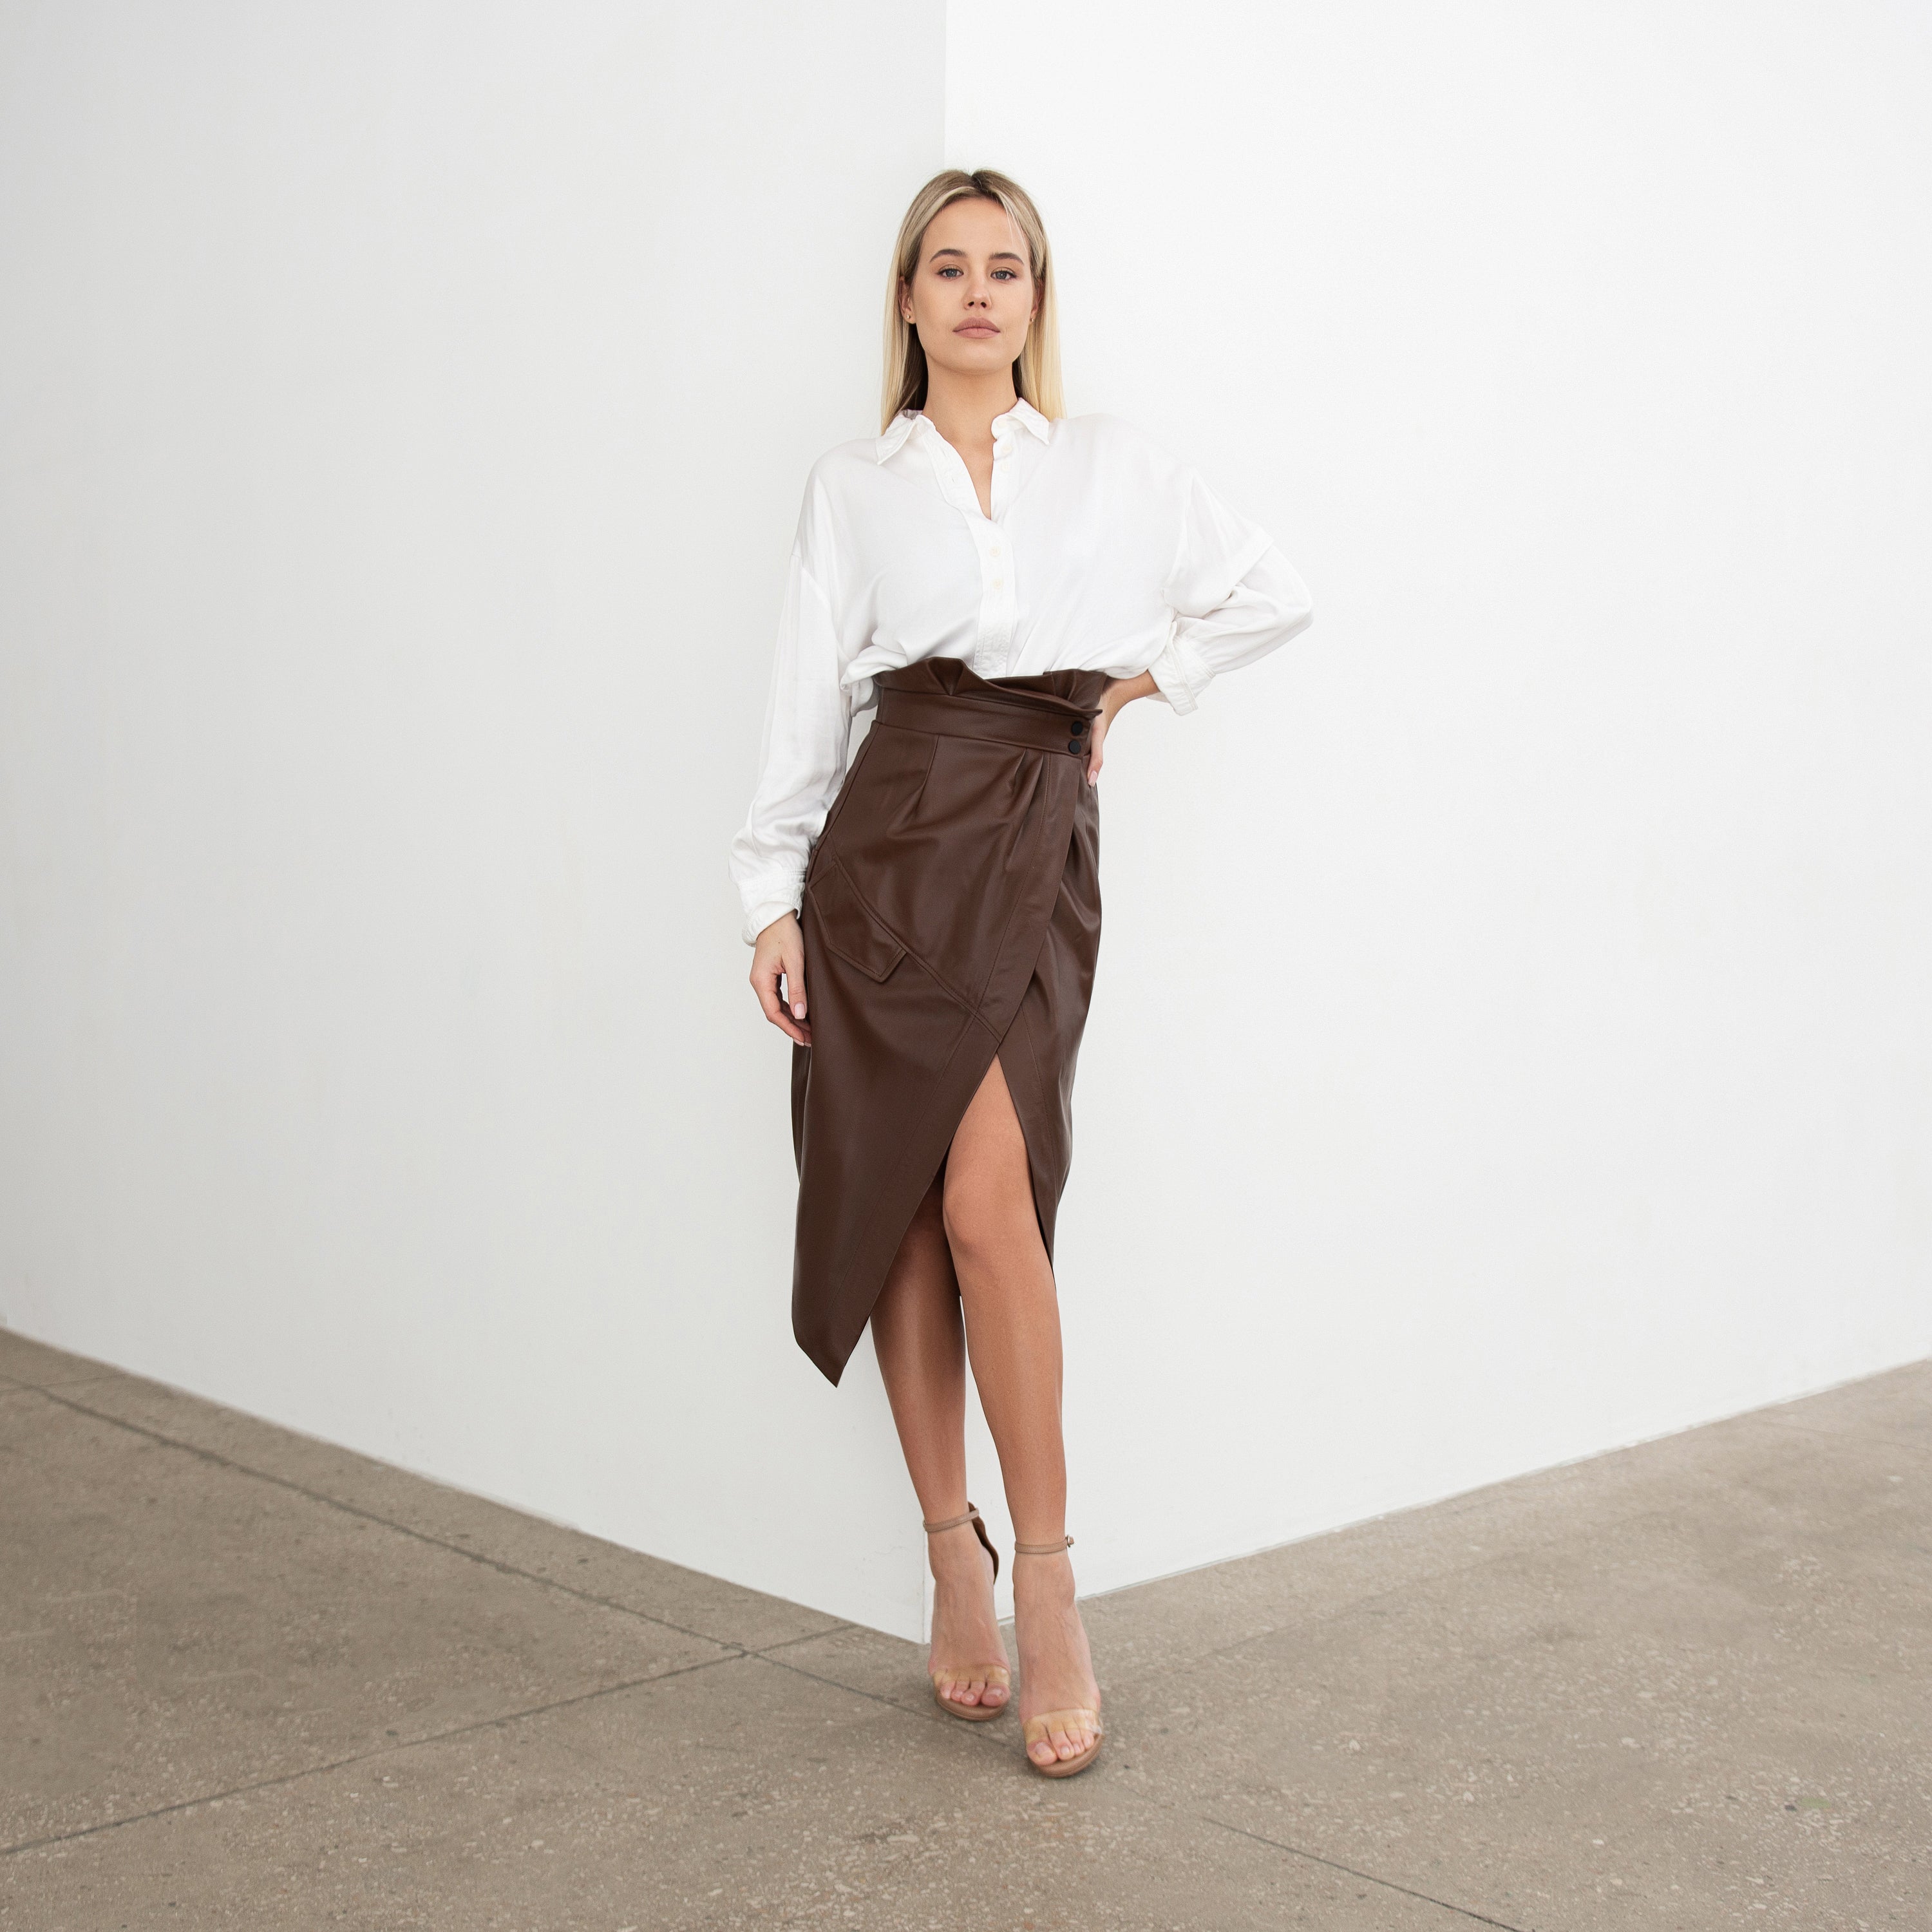 Leather skirt with a decorative flap